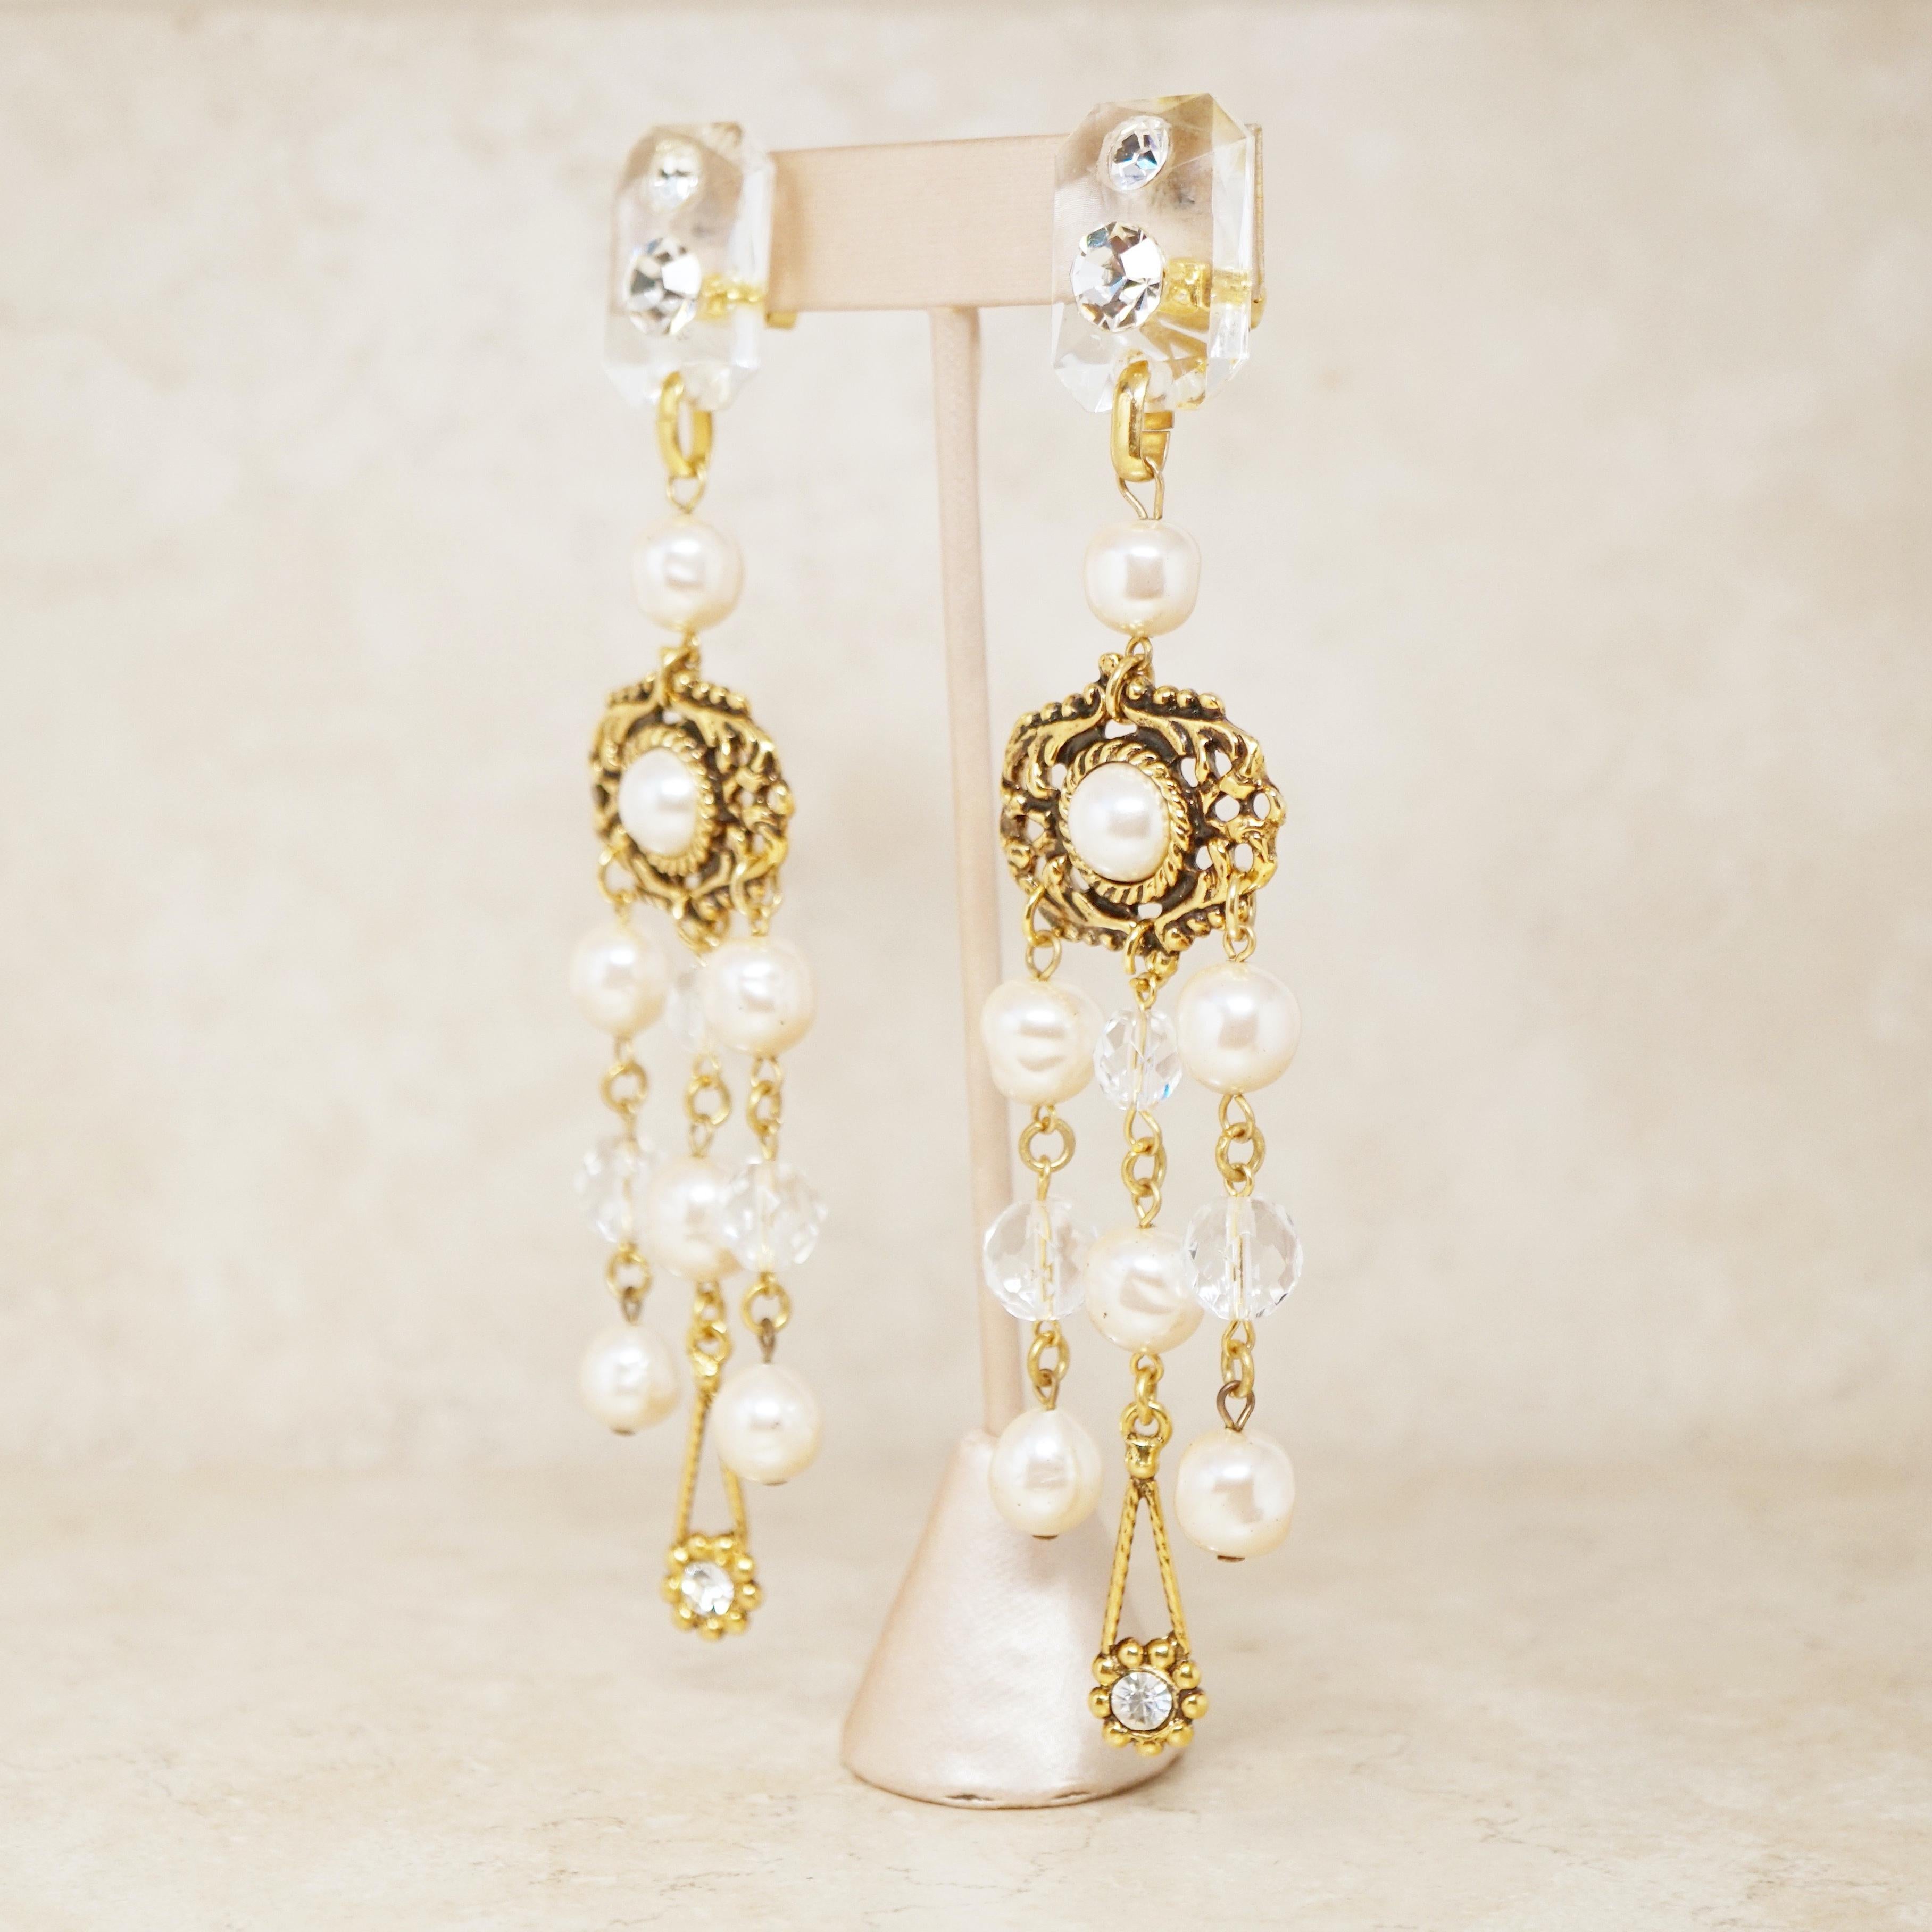 Vintage Lucite, Crystal & Pearl Chandelier Earrings by Gianni De Liguoro, 1980s In Excellent Condition For Sale In McKinney, TX